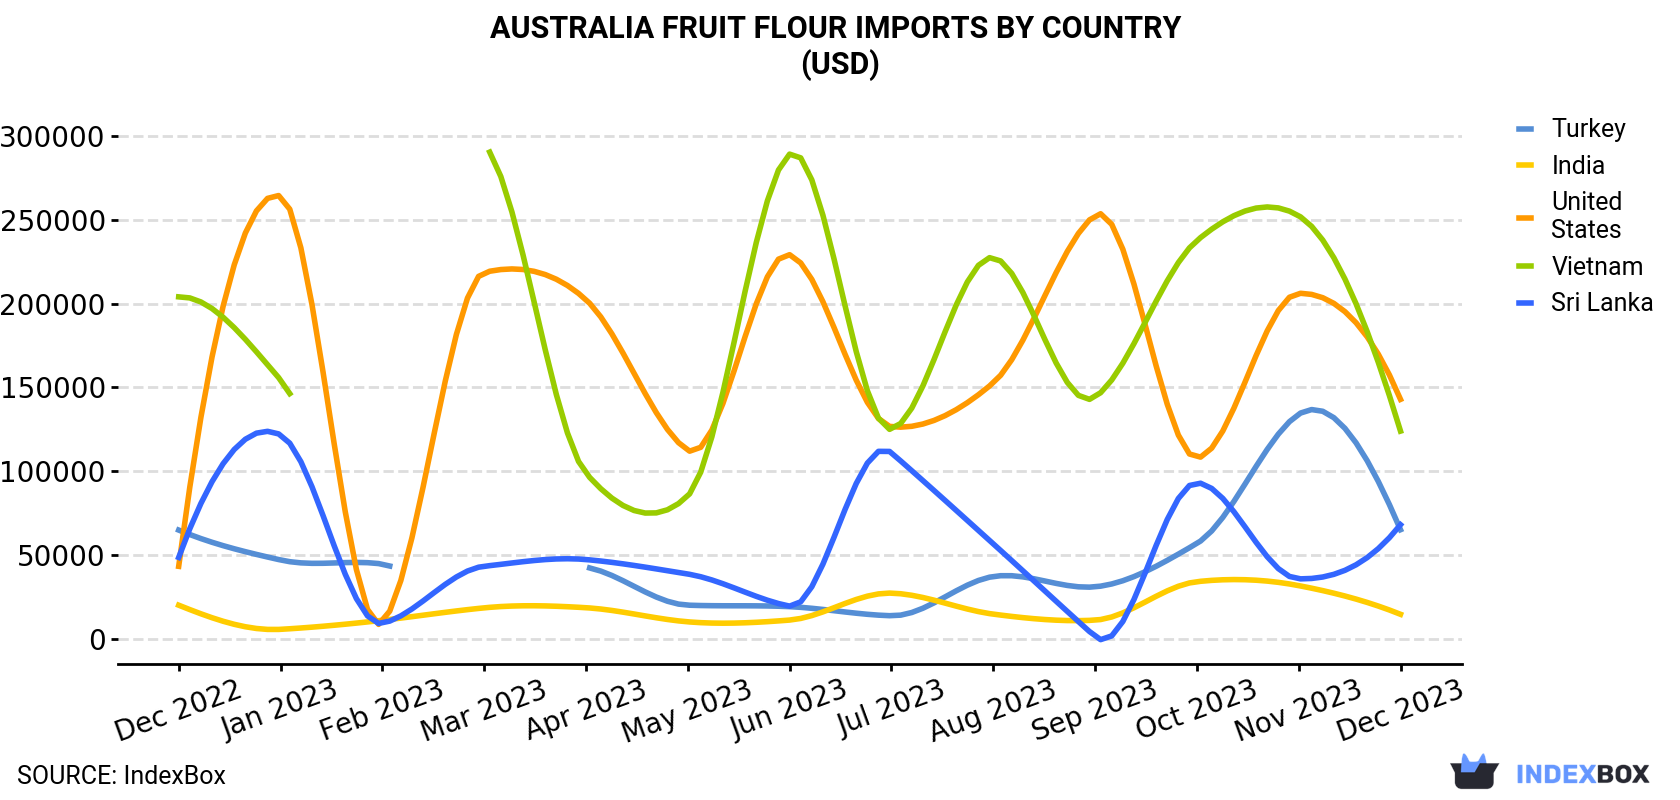 Australia Fruit Flour Imports By Country (USD)